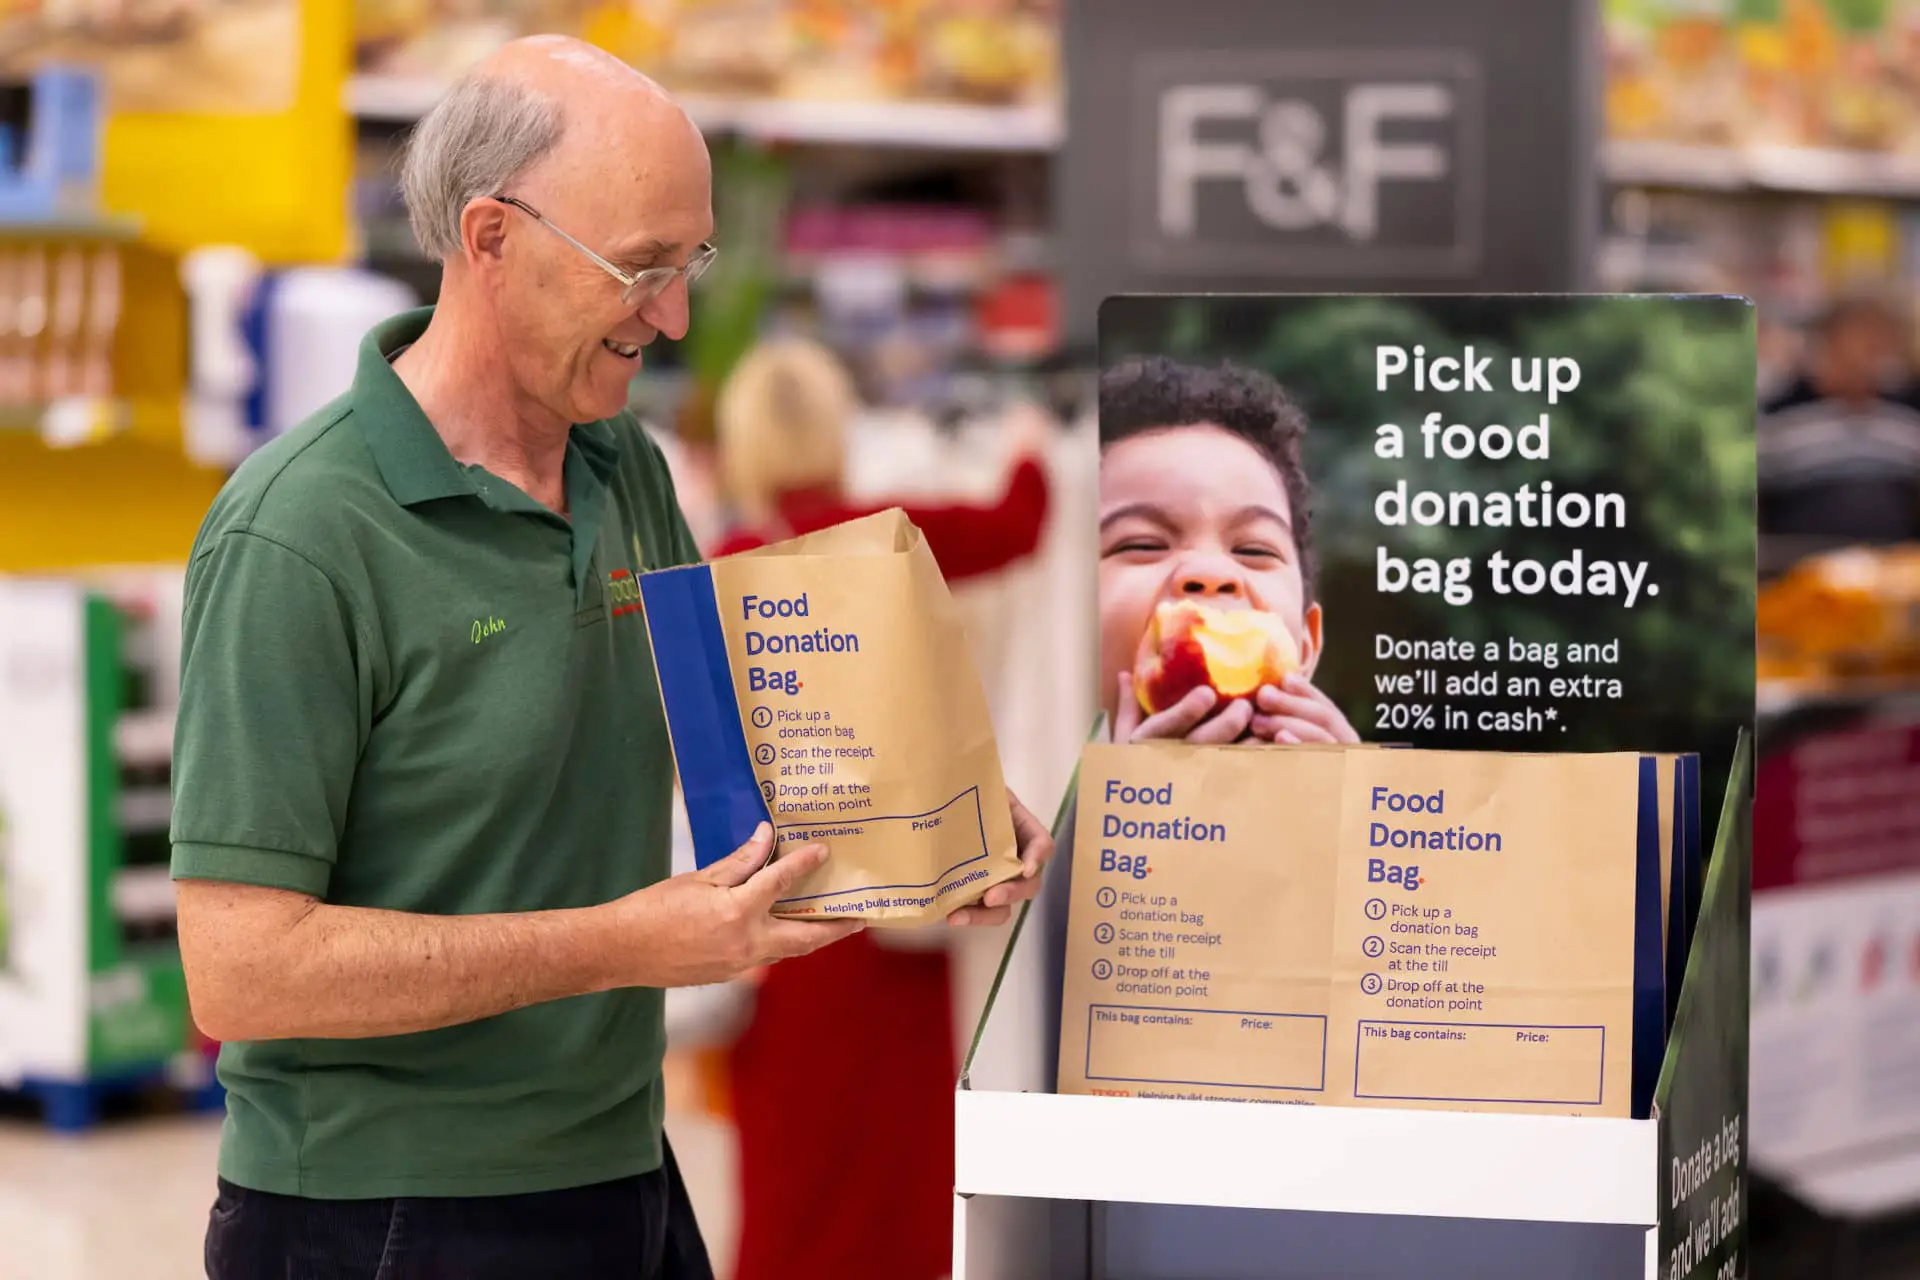 Volunteer at Tesco Food Collection Point